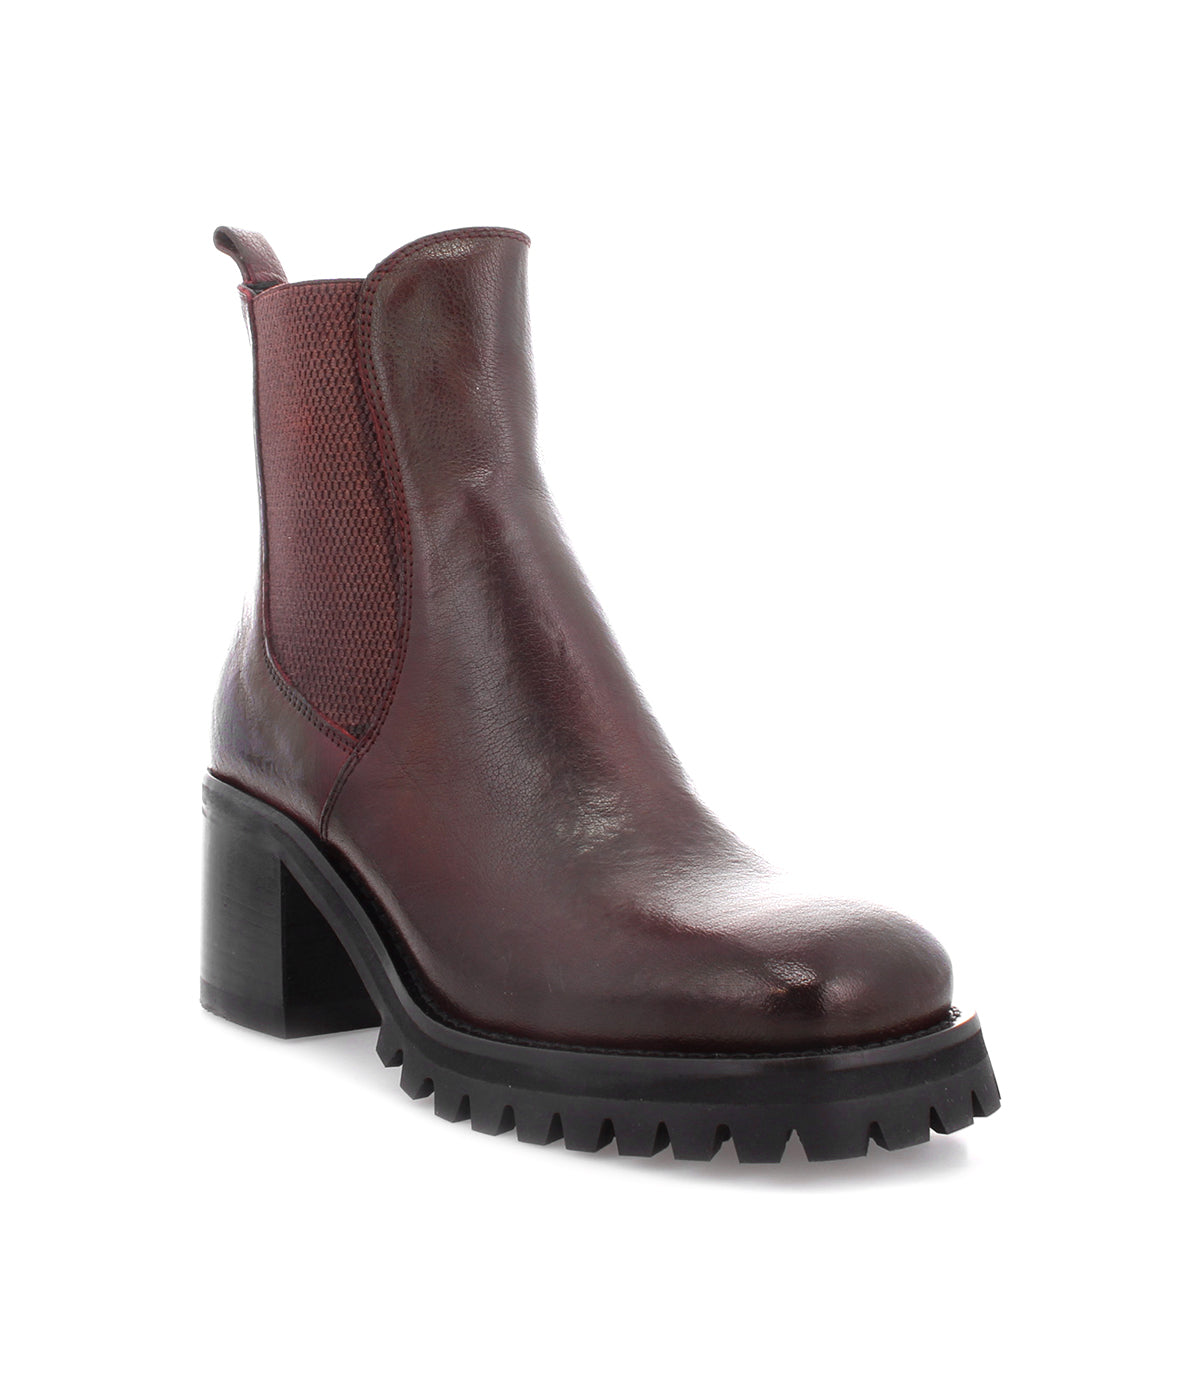 A women's burgundy leather Surge Chelsea boot with a higher heel by Bed Stu.